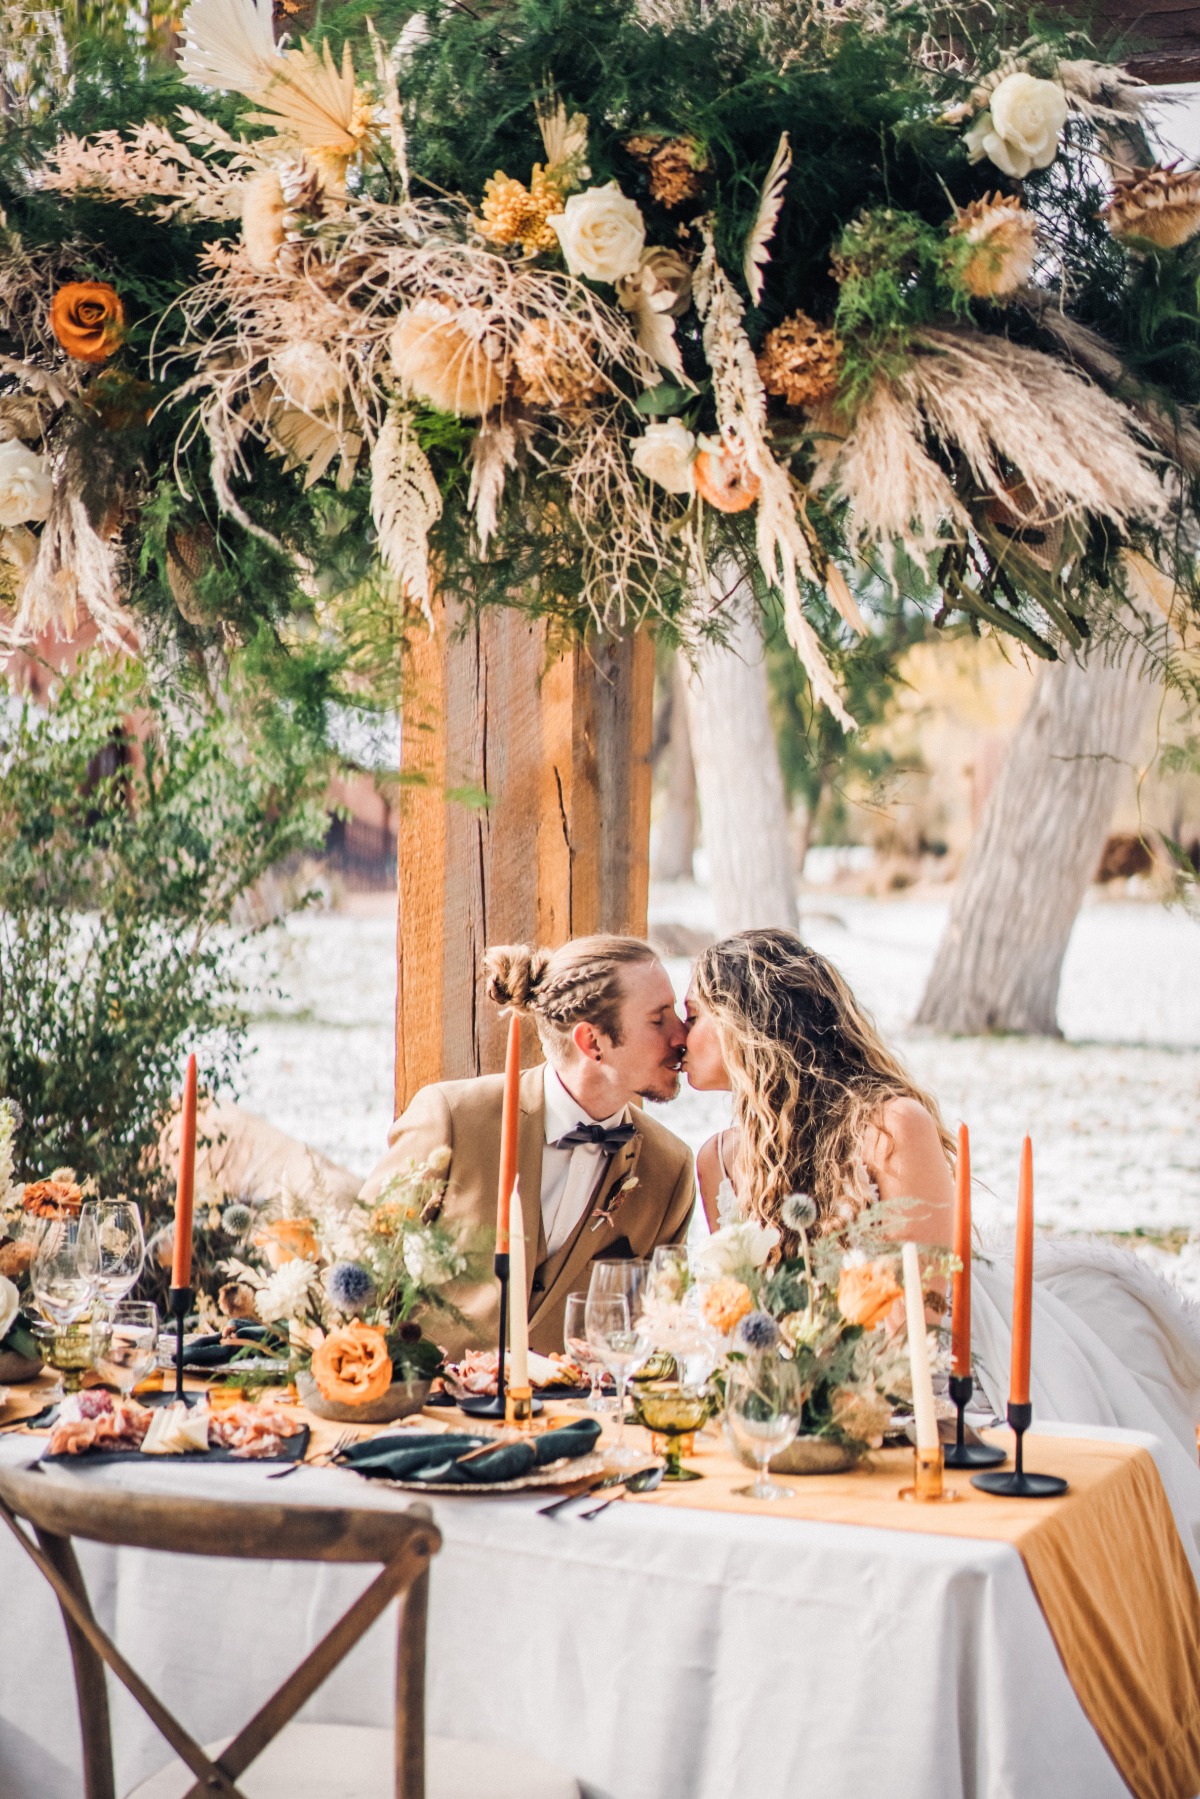 Snowy Desert Styled Shoot Turned Real Micro-Wedding